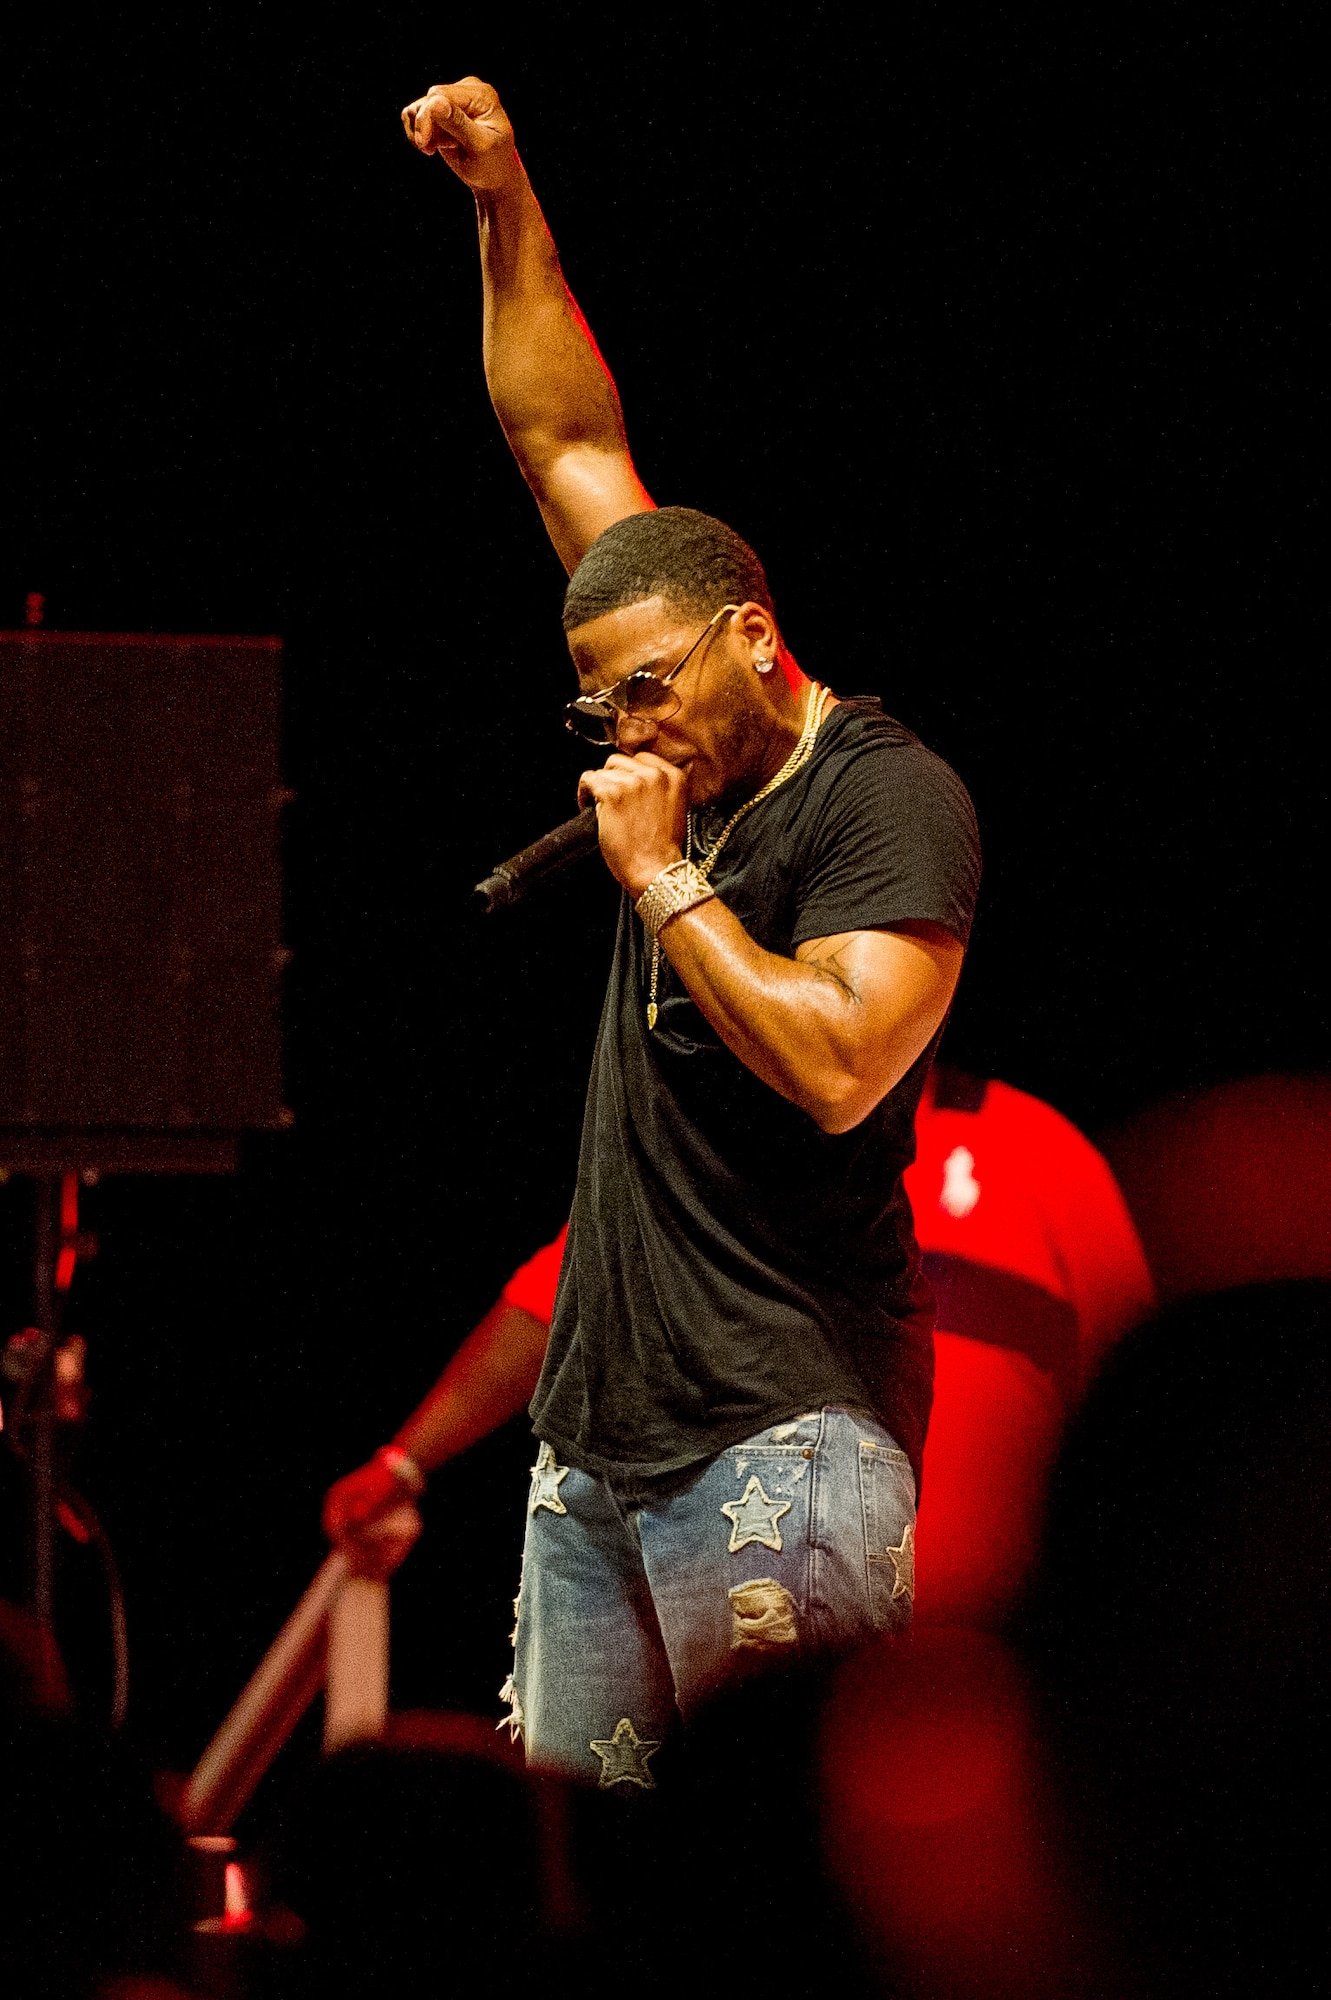 Nelly performs a song for Team Osan members at Osan Air Base, Republic of Korea, Sept. 3, 2016. Team Osan members was able to meet Nelly after the performance during a meet and greet to get photos and signatures. (U.S. Air Force photo by Staff Sgt. Jonathan Steffen)                                                                                           